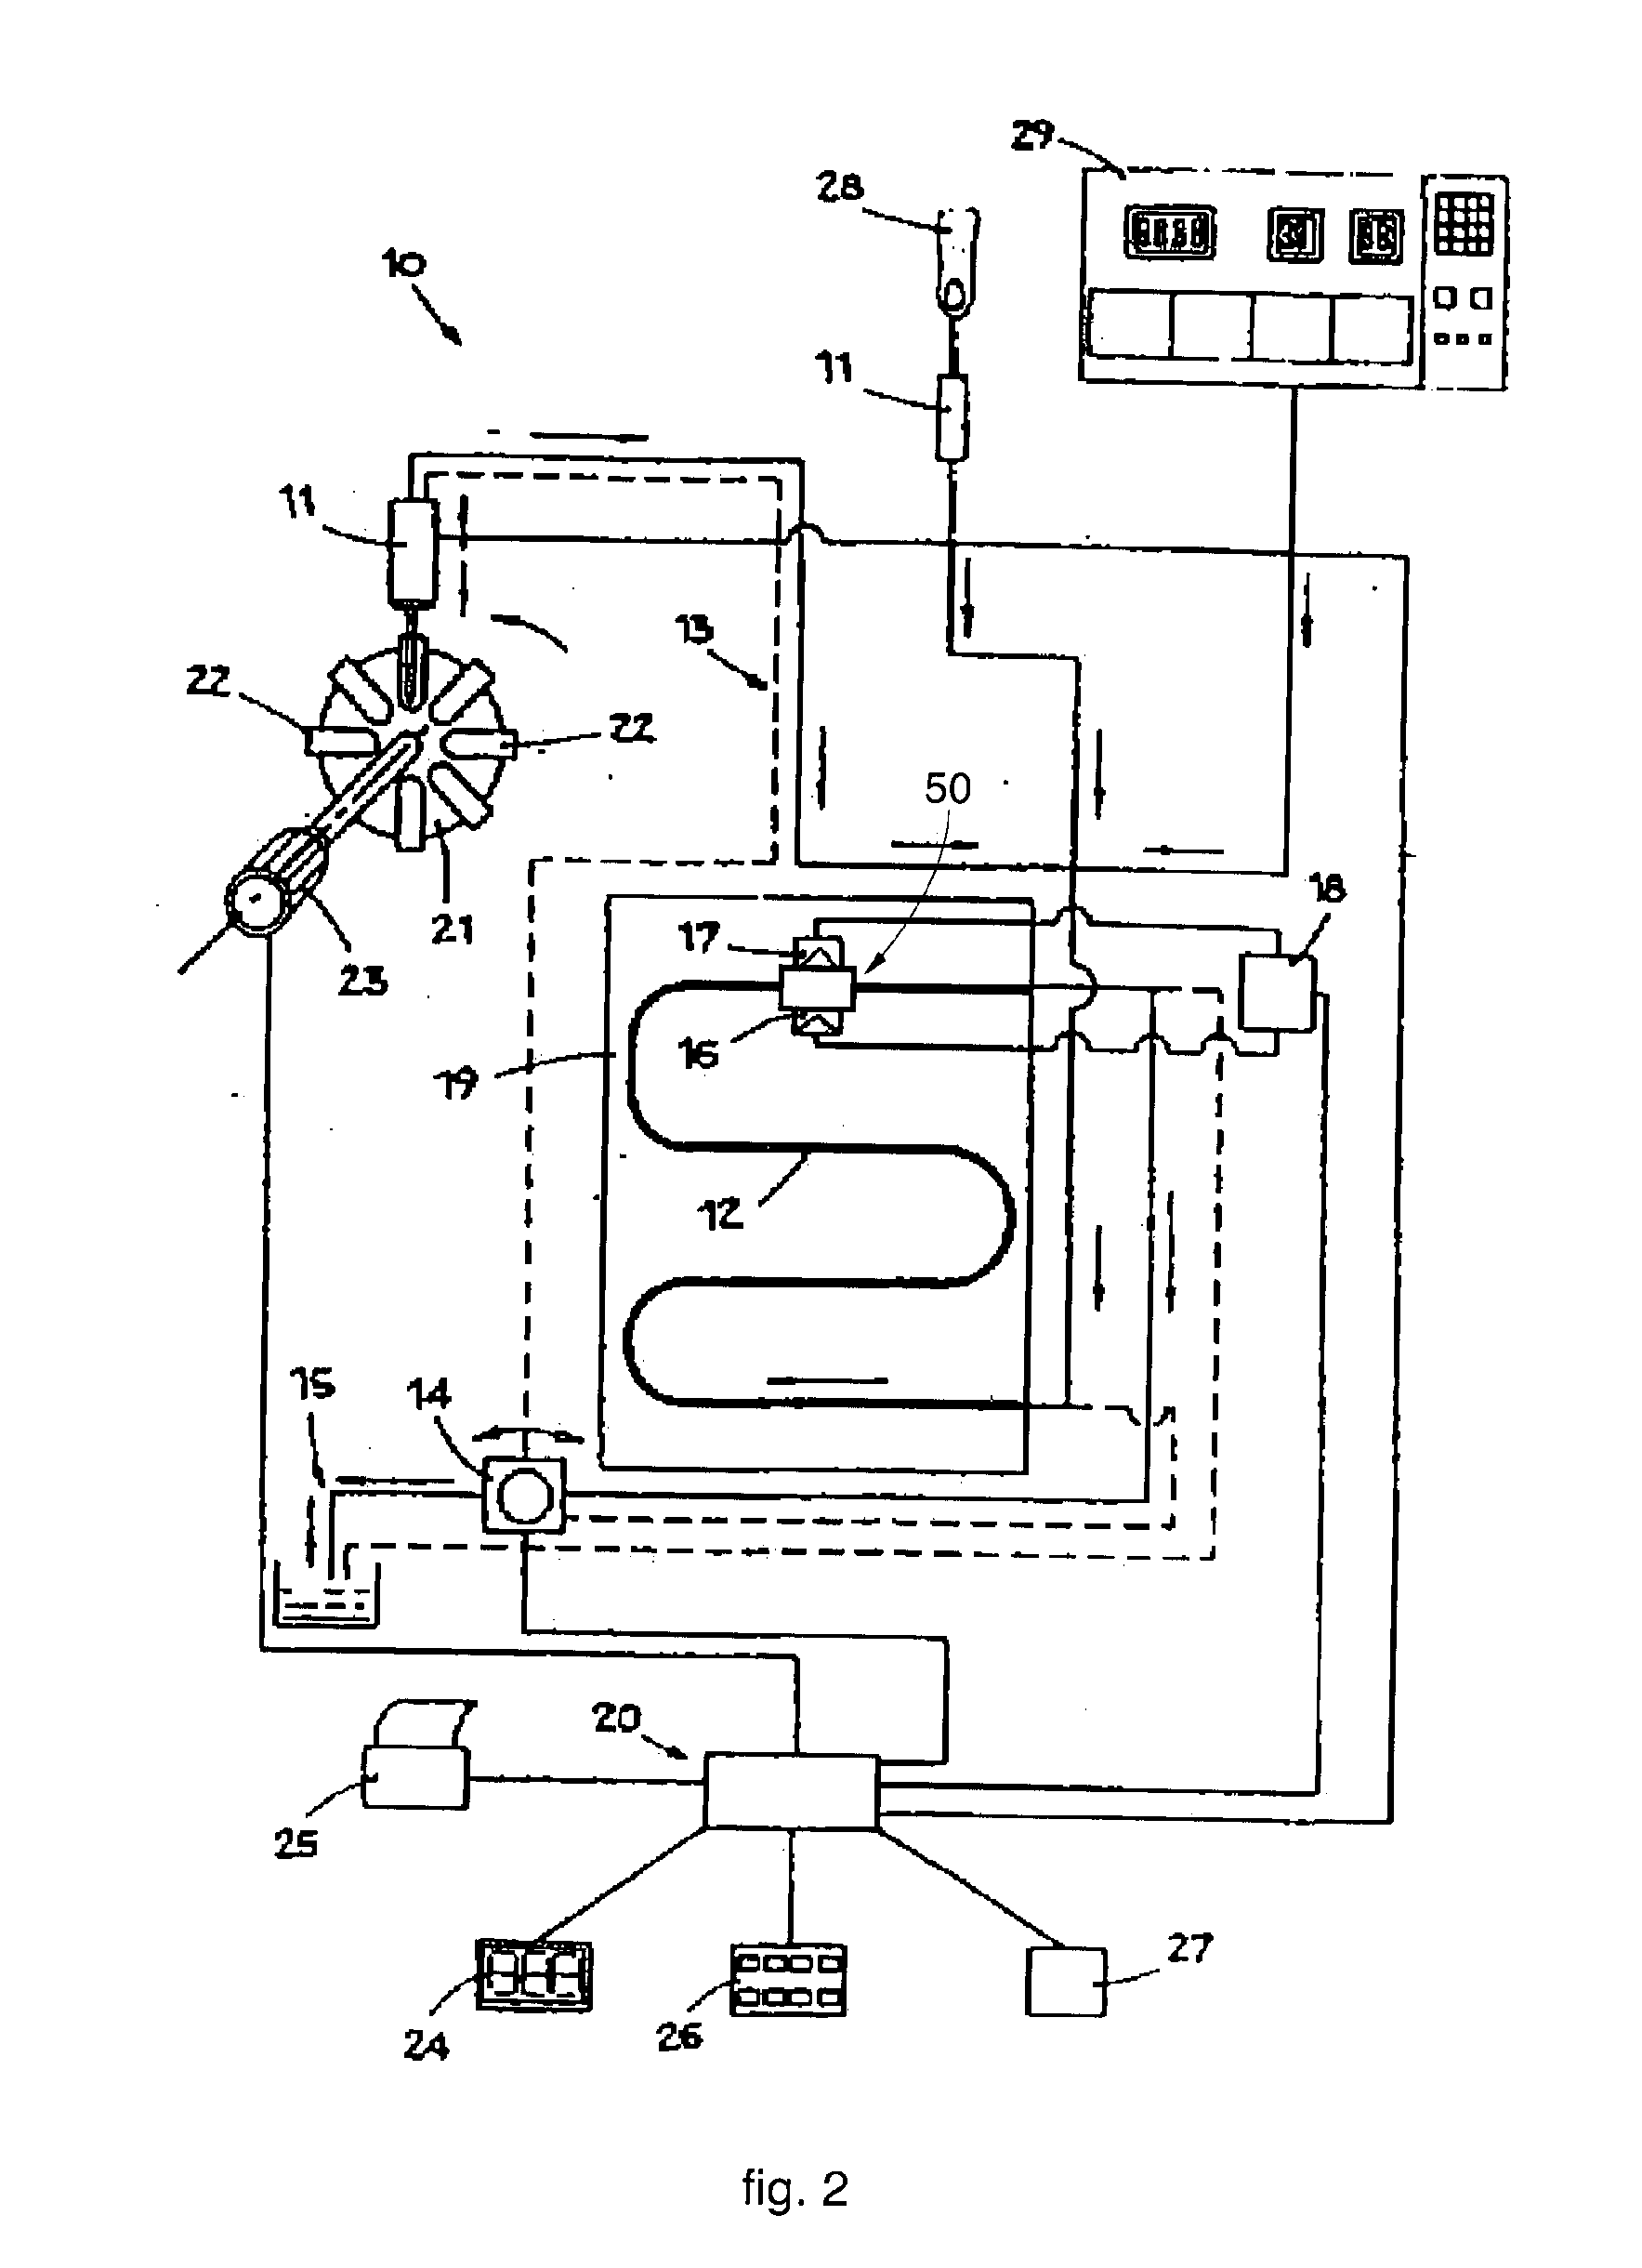 Apparatus and Method to Determine the Blood Sedimentation Rate and Other Parameters Connected Thereto